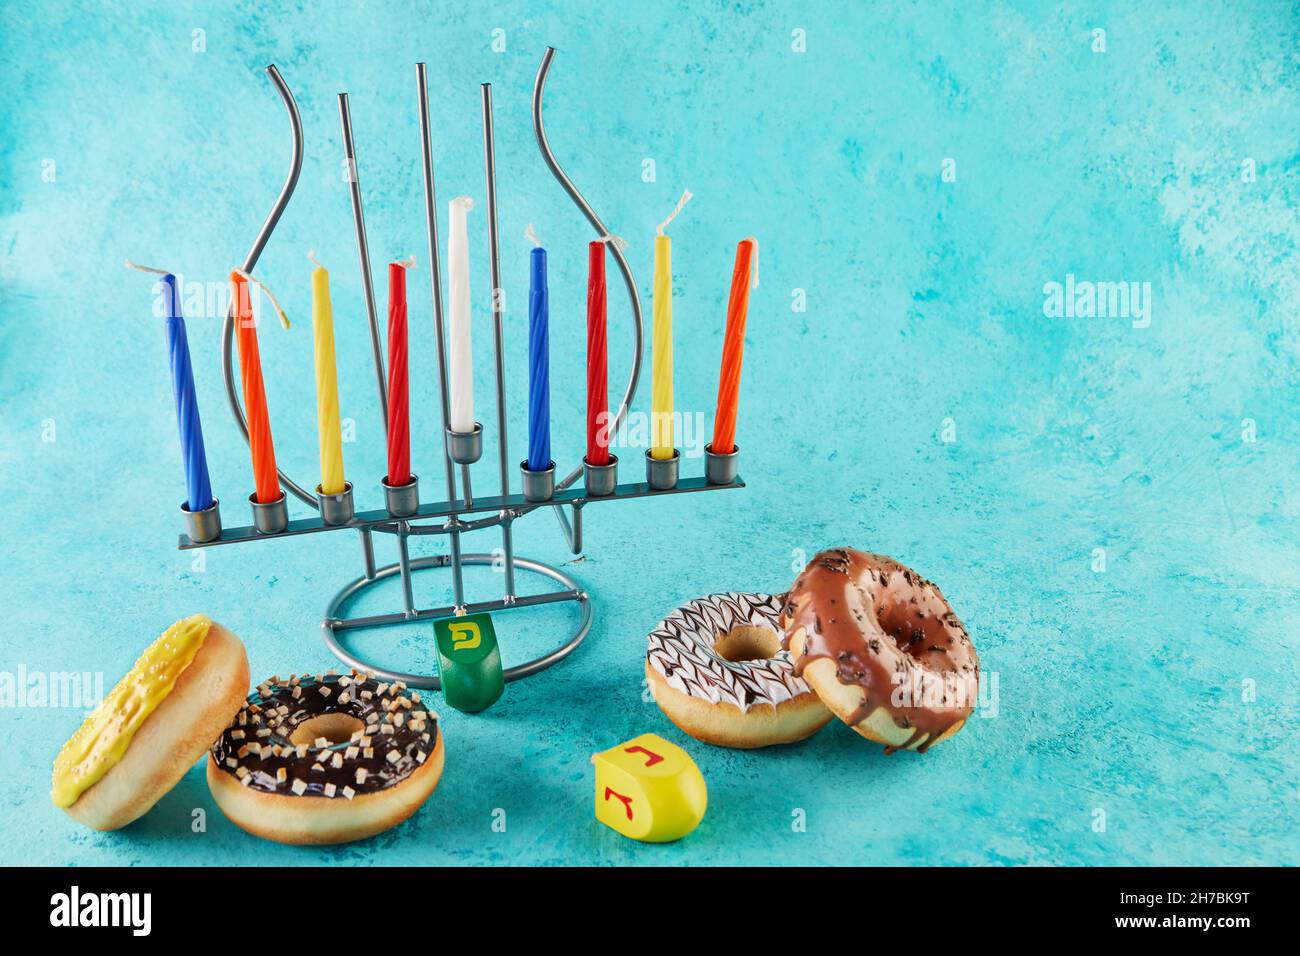 Happy Hanukkah and Hanukkah Sameach - traditional Jewish candlestick with candles, donuts and spinning tops on blue background. Inscription in Hebrew Stock Photo